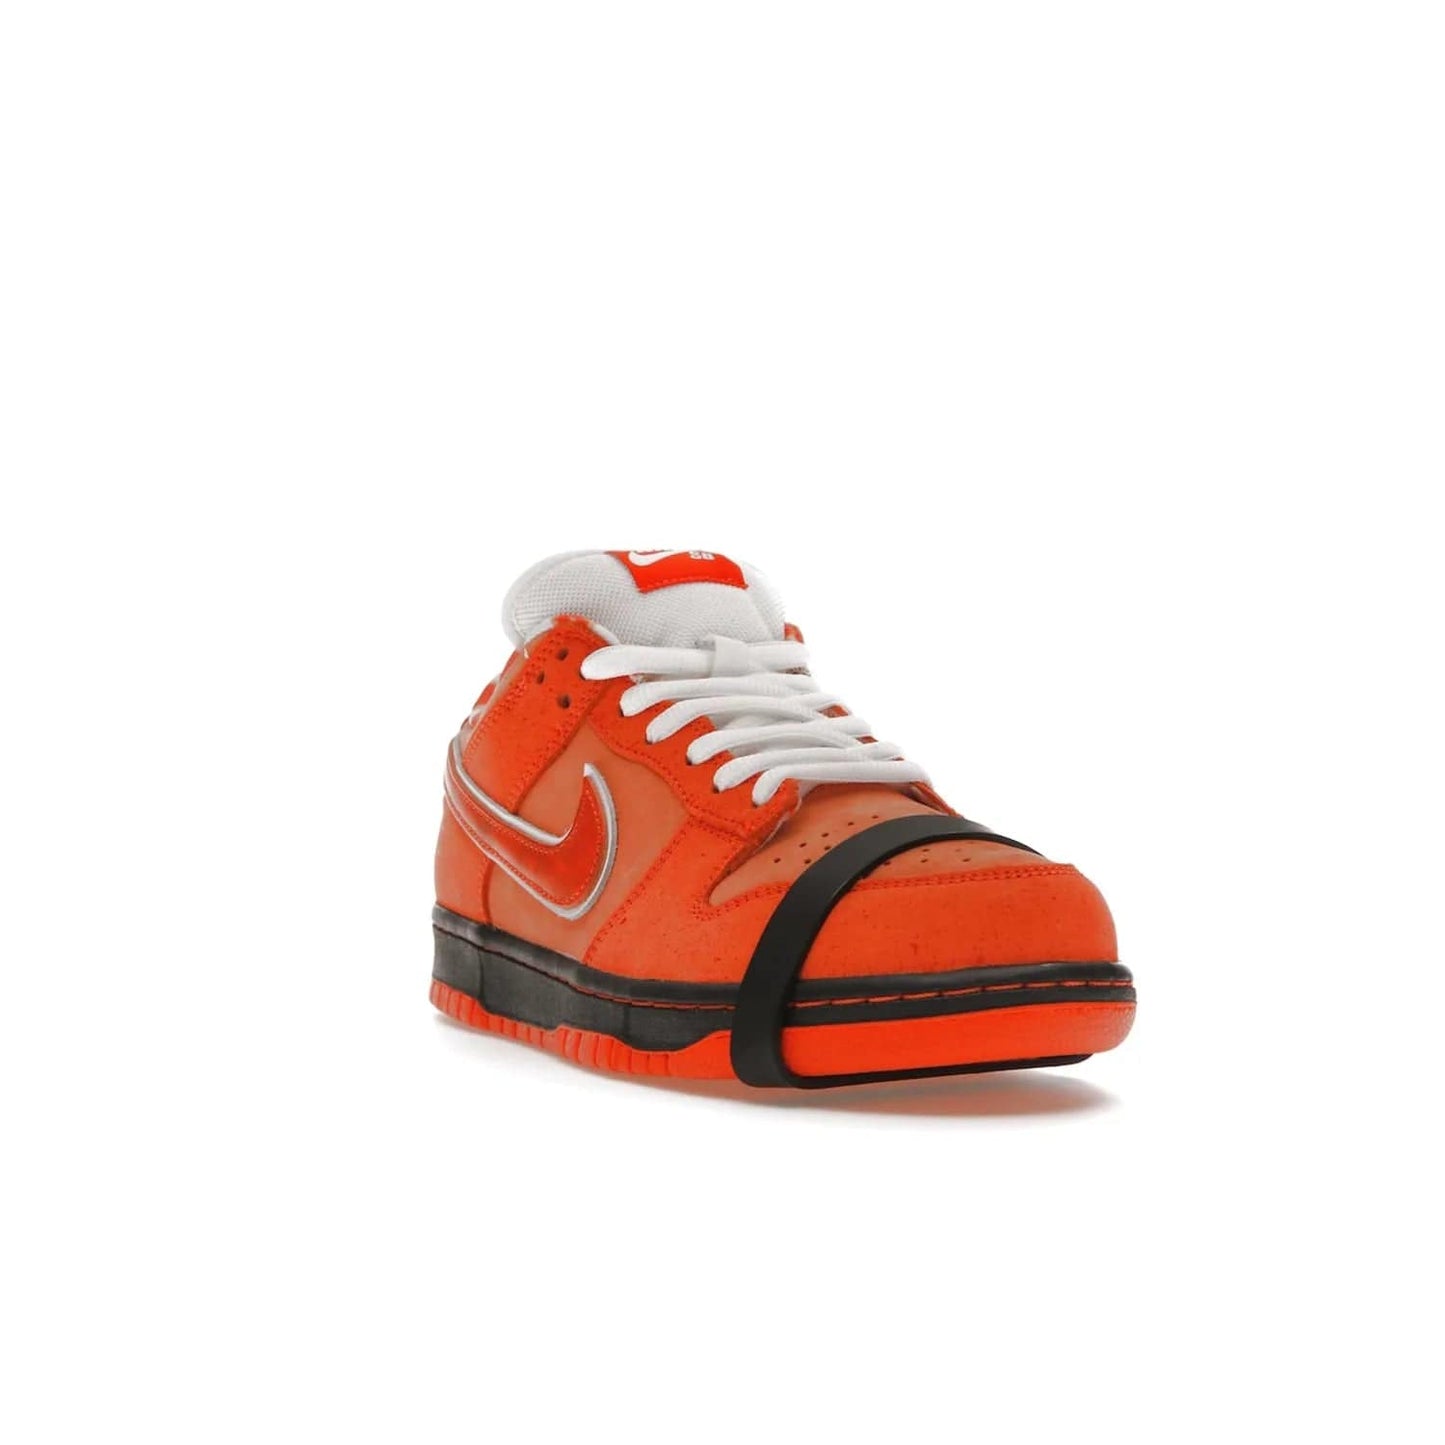 Nike SB Dunk Low Concepts Orange Lobster - Image 7 - Only at www.BallersClubKickz.com - Limited Nike SB Dunk Low Concepts Orange Lobster features premium nubuck upper with vibrant oranges for eye-catching colorblocked design. Signature Nike SB tag and bib-inspired interior for added texture. Outsole and cupsole provide extra reinforcement. Get it 12/20/2022.